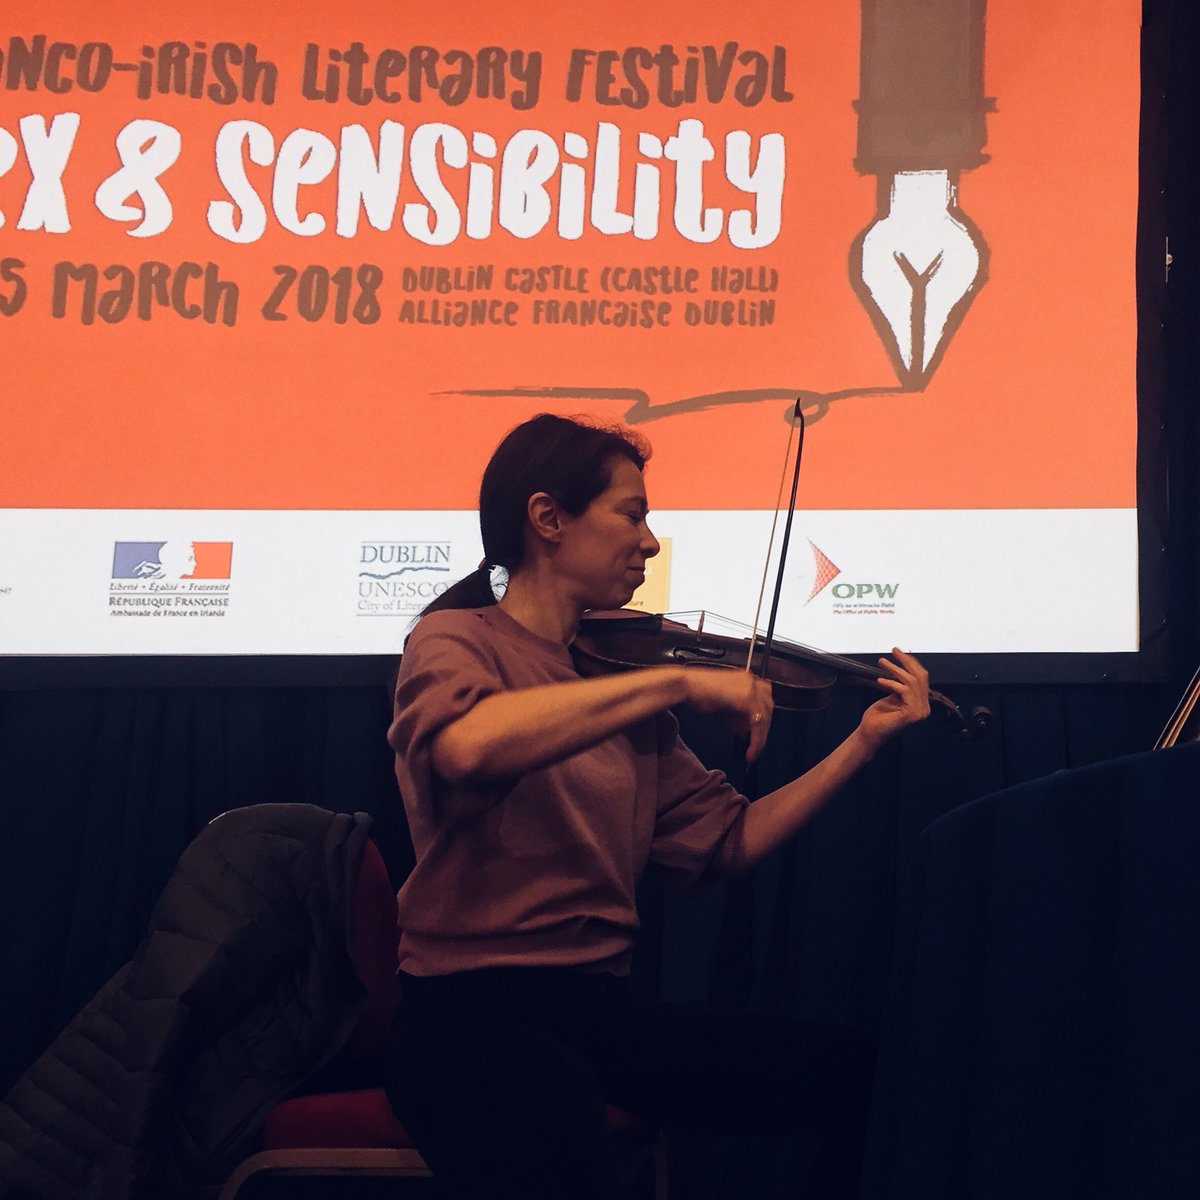 #HappeningNow Franco-Irish #literary #festival 4th panel discussion ends with writer/musician Léonor de Récondo playing live + reading by Jean-Philippe Imbert #FILF18 #literature